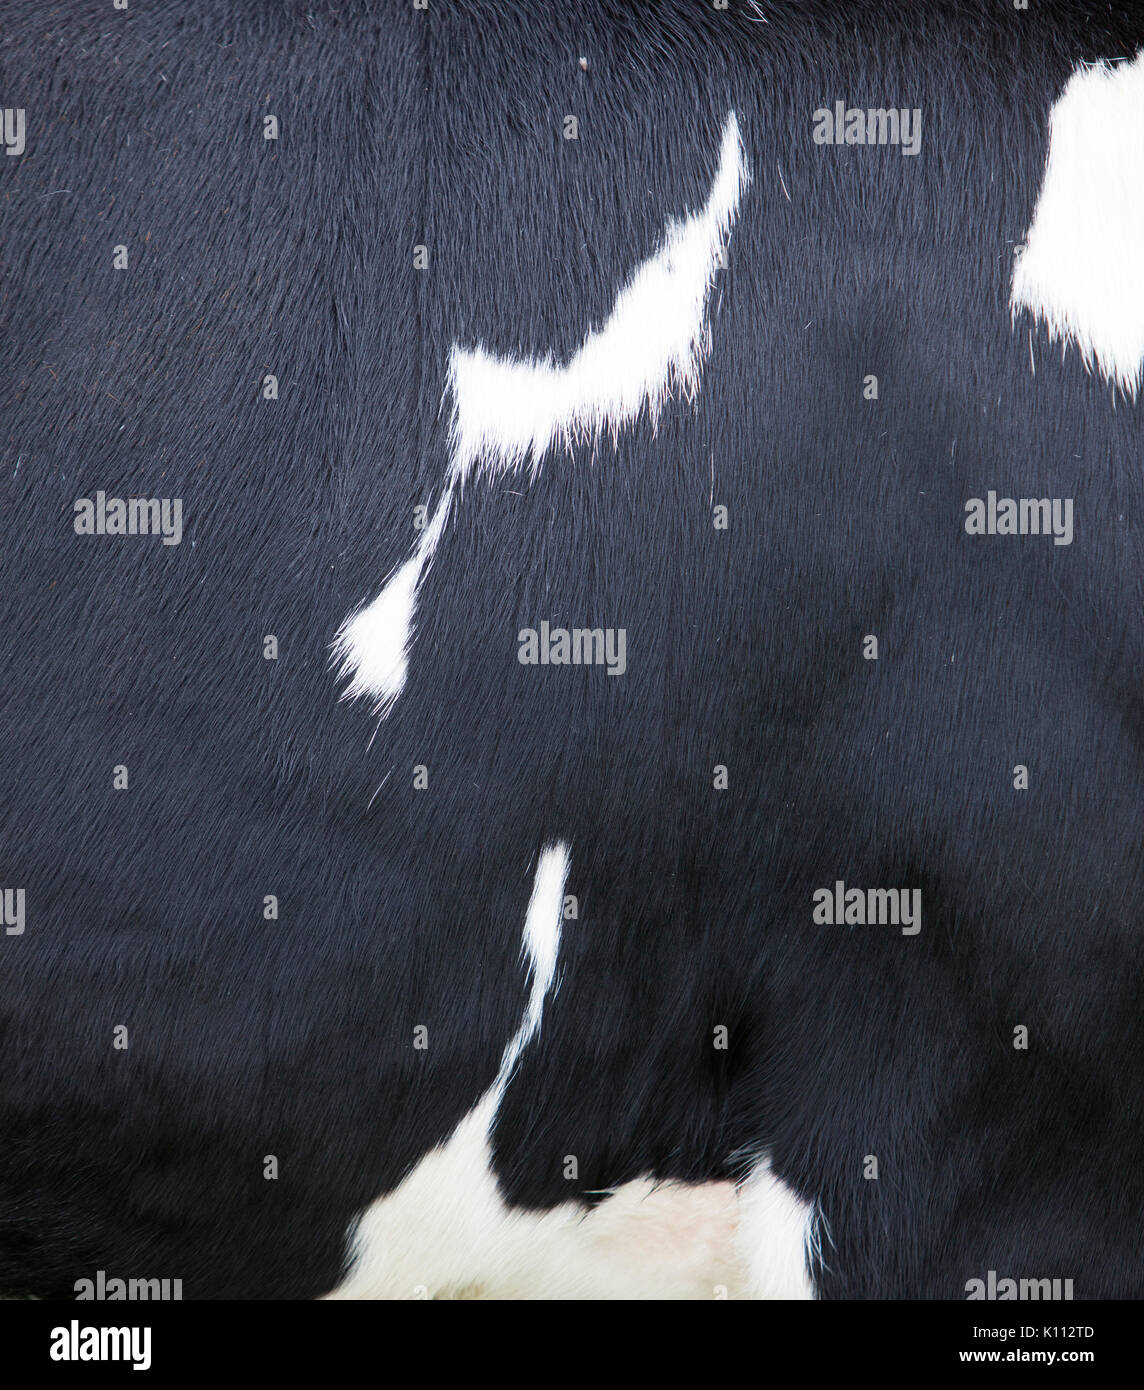 black and white pattern on hide on side of cow Stock Photo